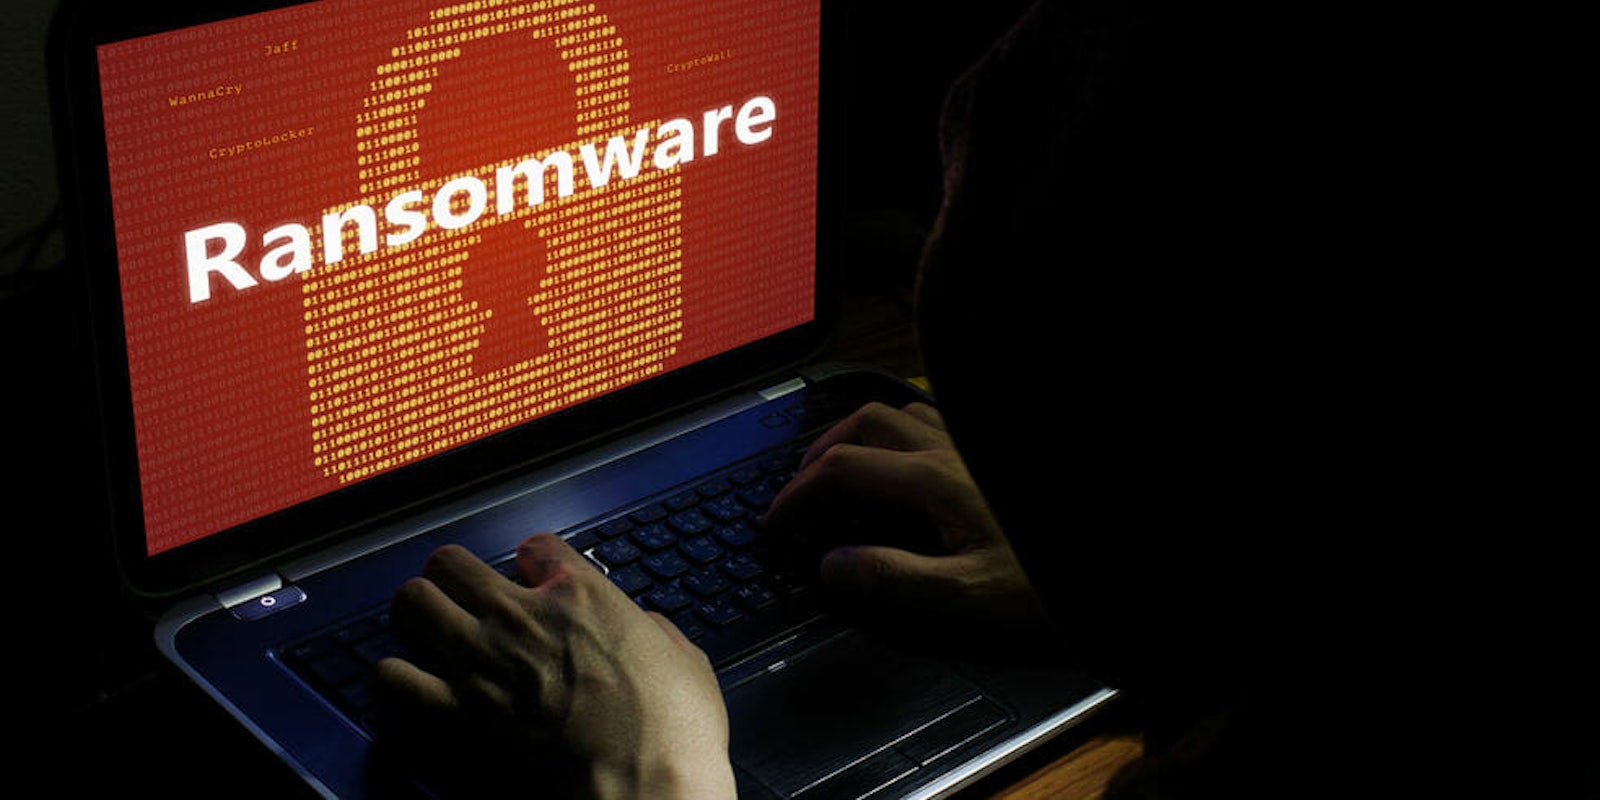 cybersecurity researcher hack ransomware malware virus